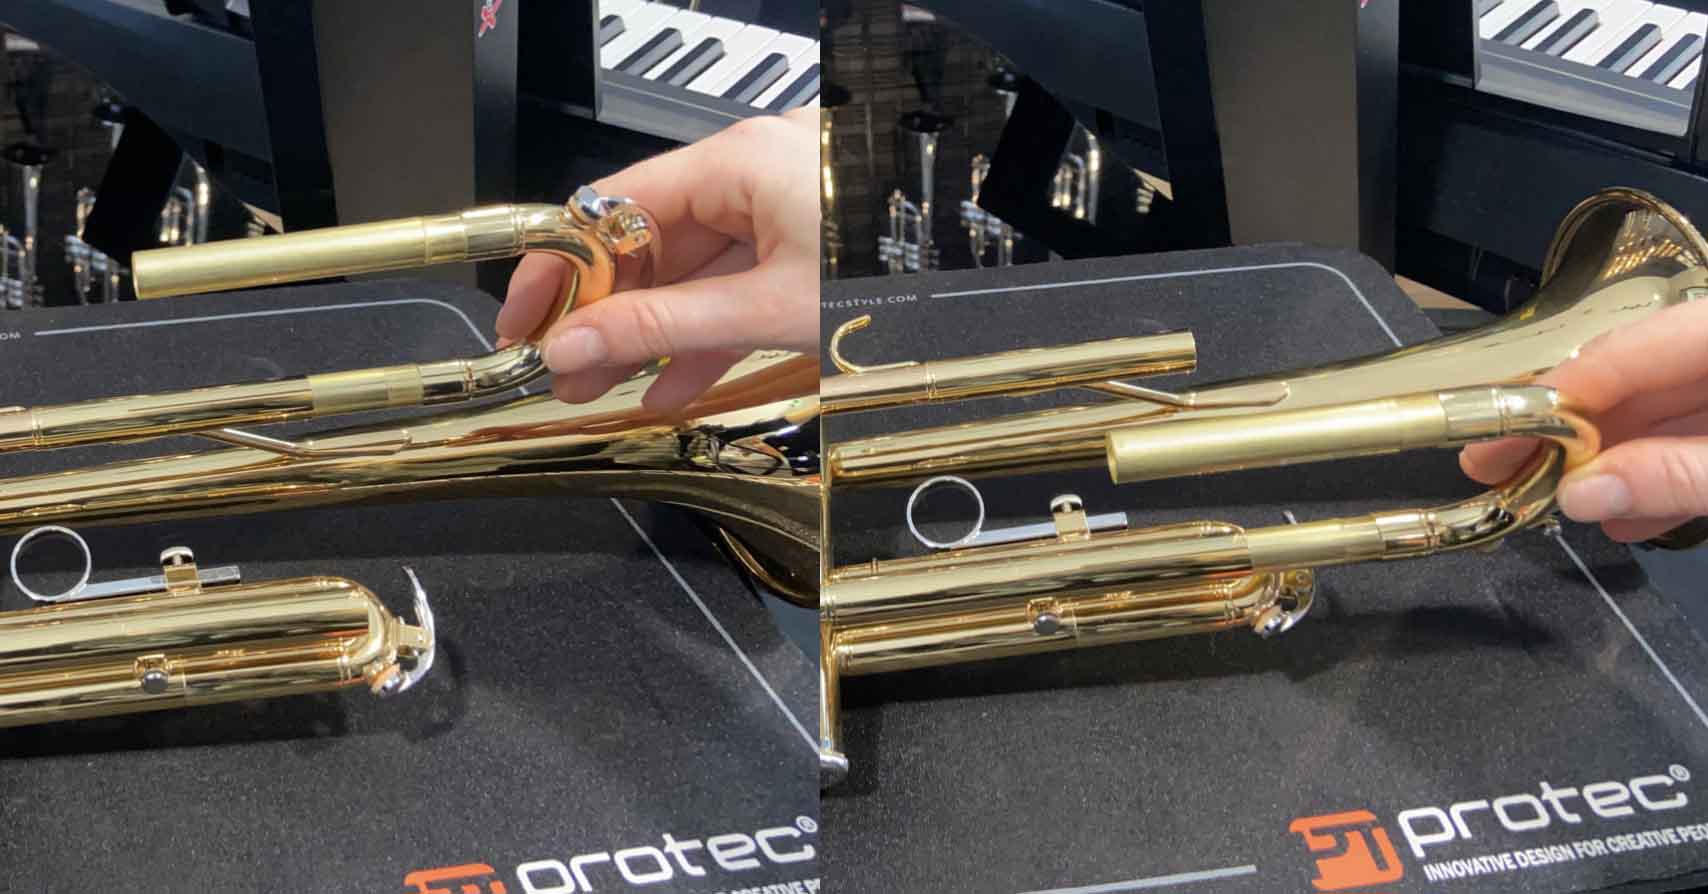 Each side of the tuning slide is being inserted and moved around inside the receiver on the trumpet.